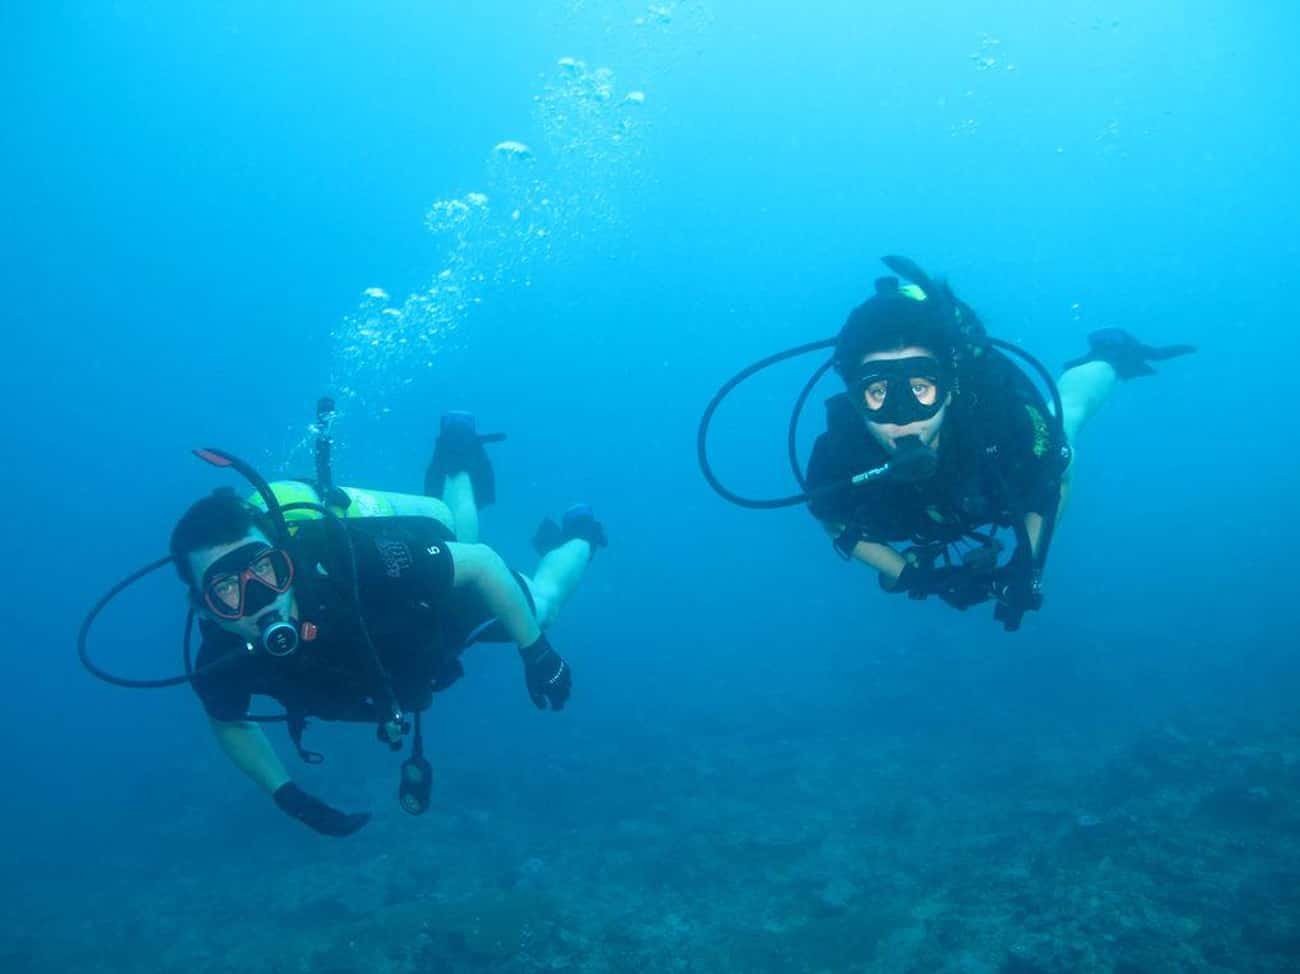 A Diver Spends 10 Hours in Darkness with His Dead Friend More Than 900 Feet Under Water